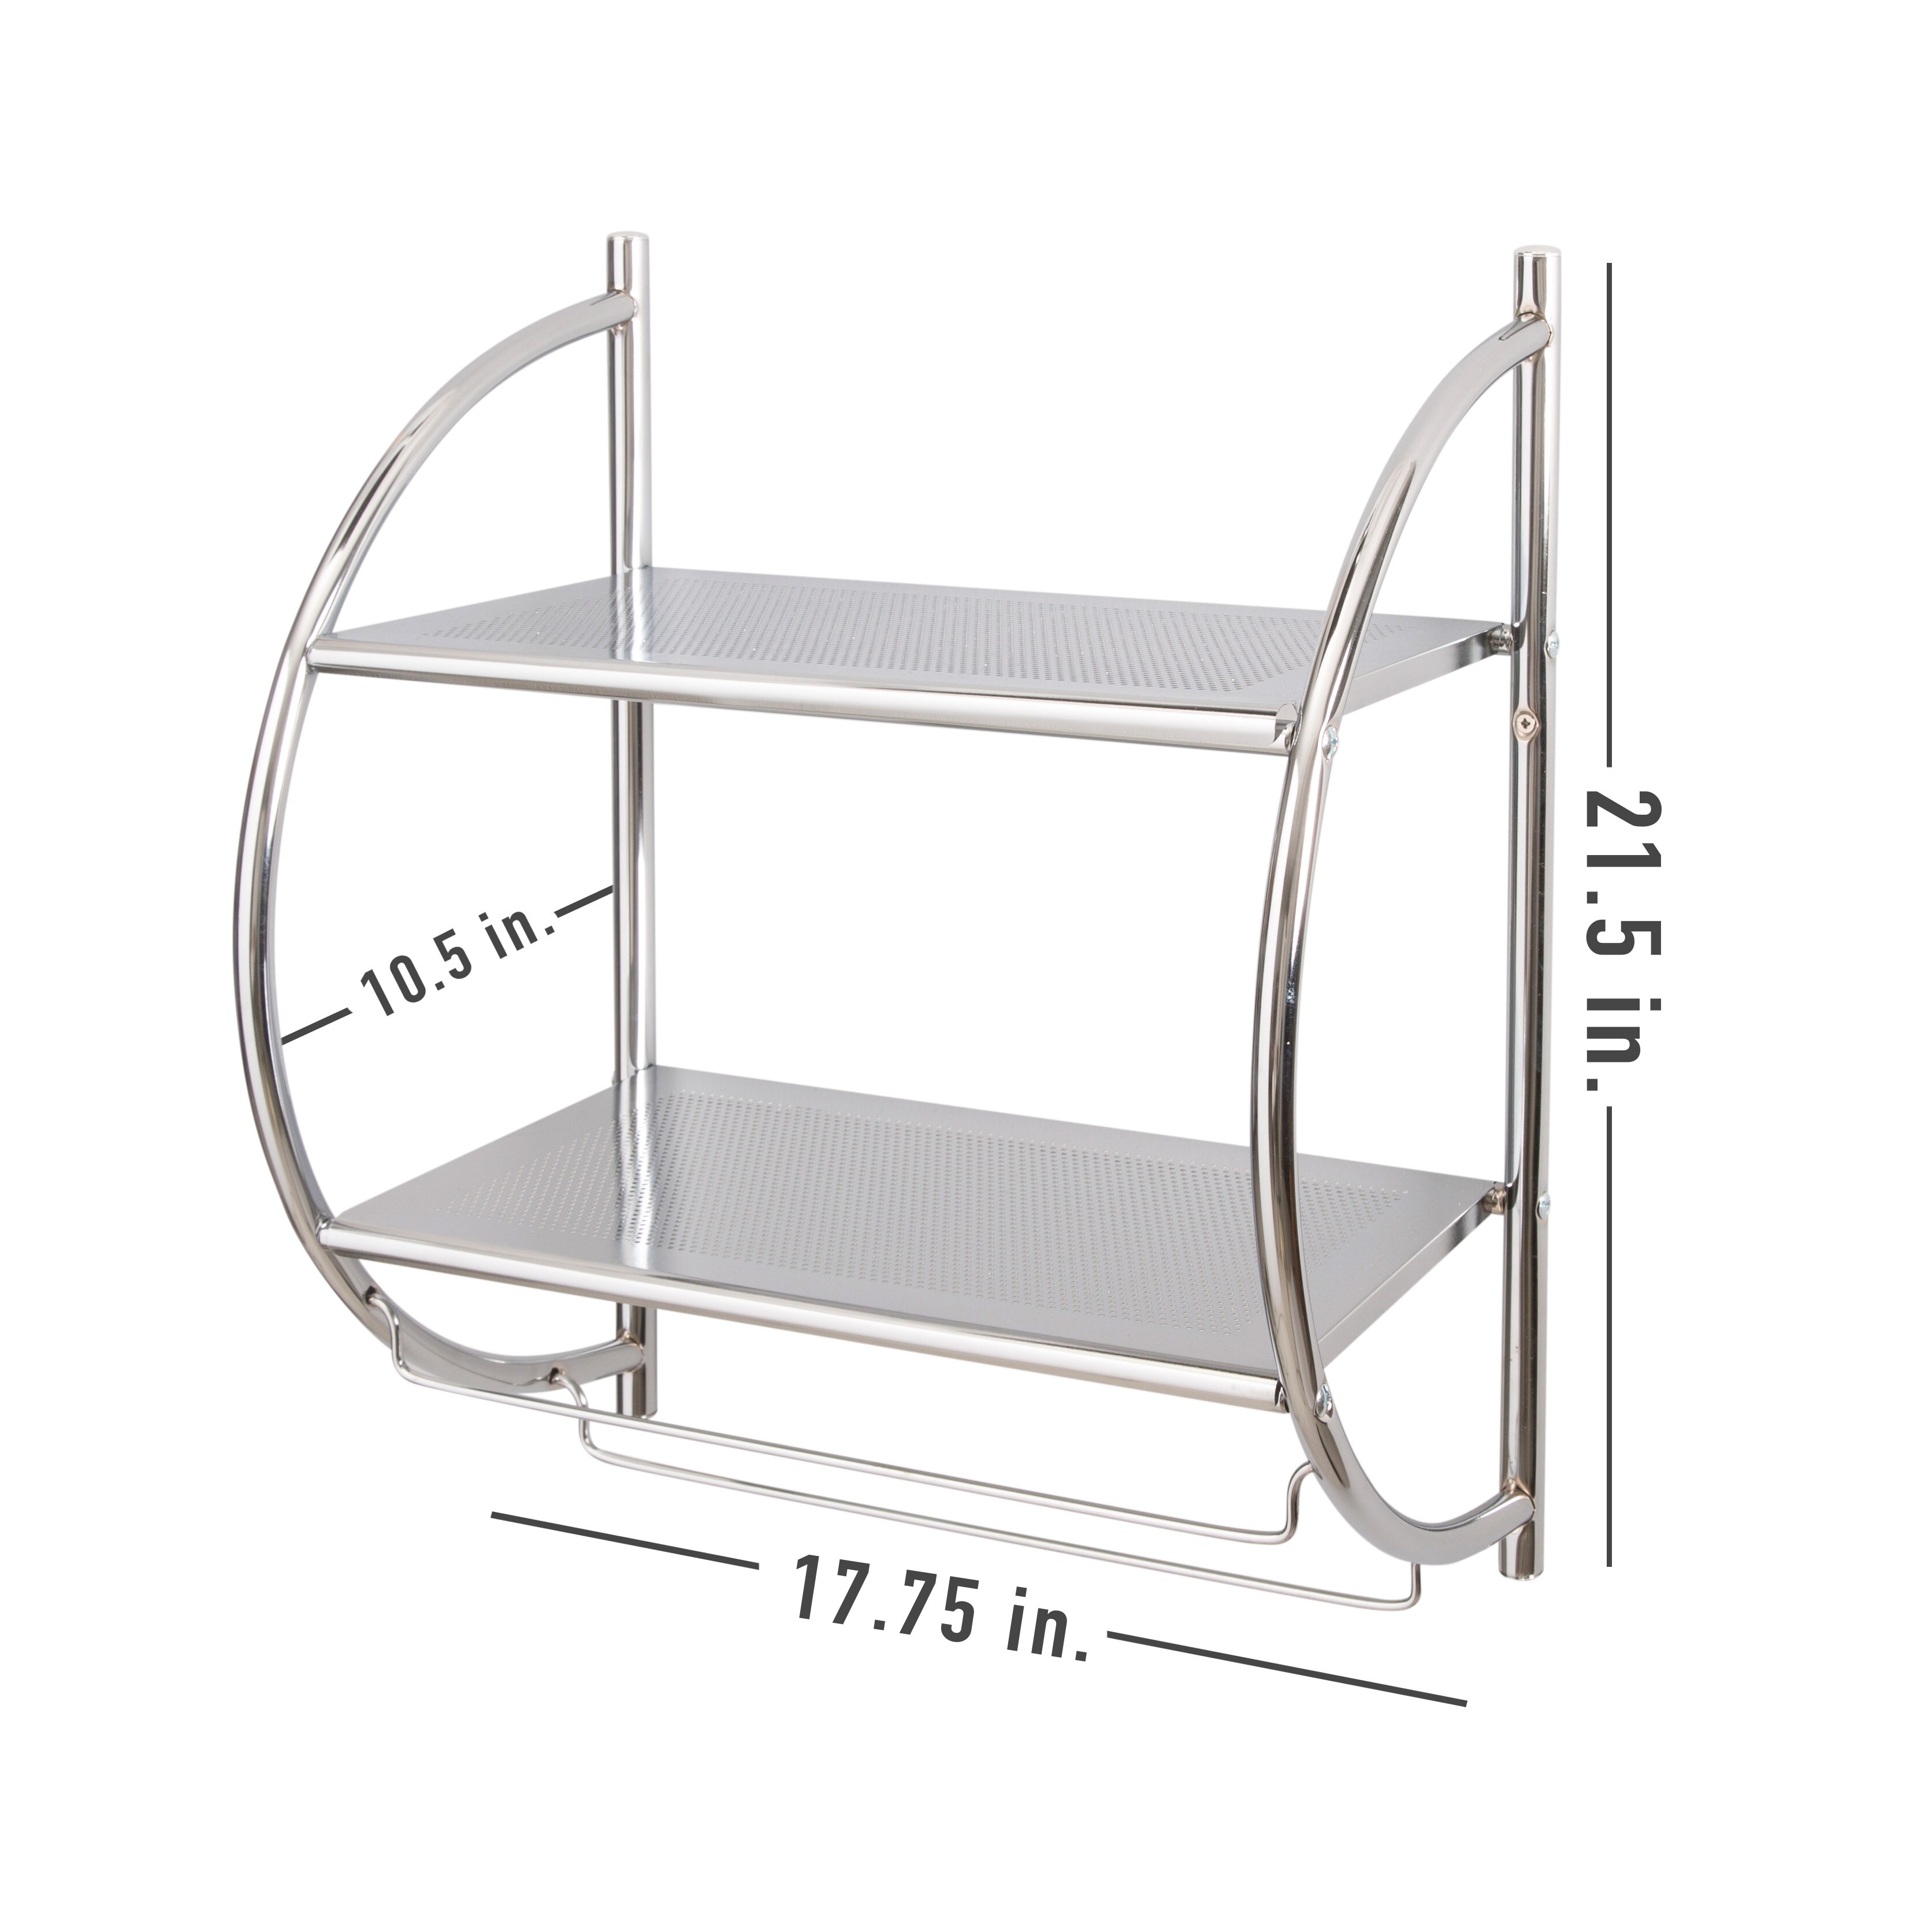 https://ak1.ostkcdn.com/images/products/is/images/direct/8402db95432059fb3707d6791d08400021b2cd69/Organize-It-All-2-Tier-Wall-Mount-Shelf-with-Towel-Bars.jpg